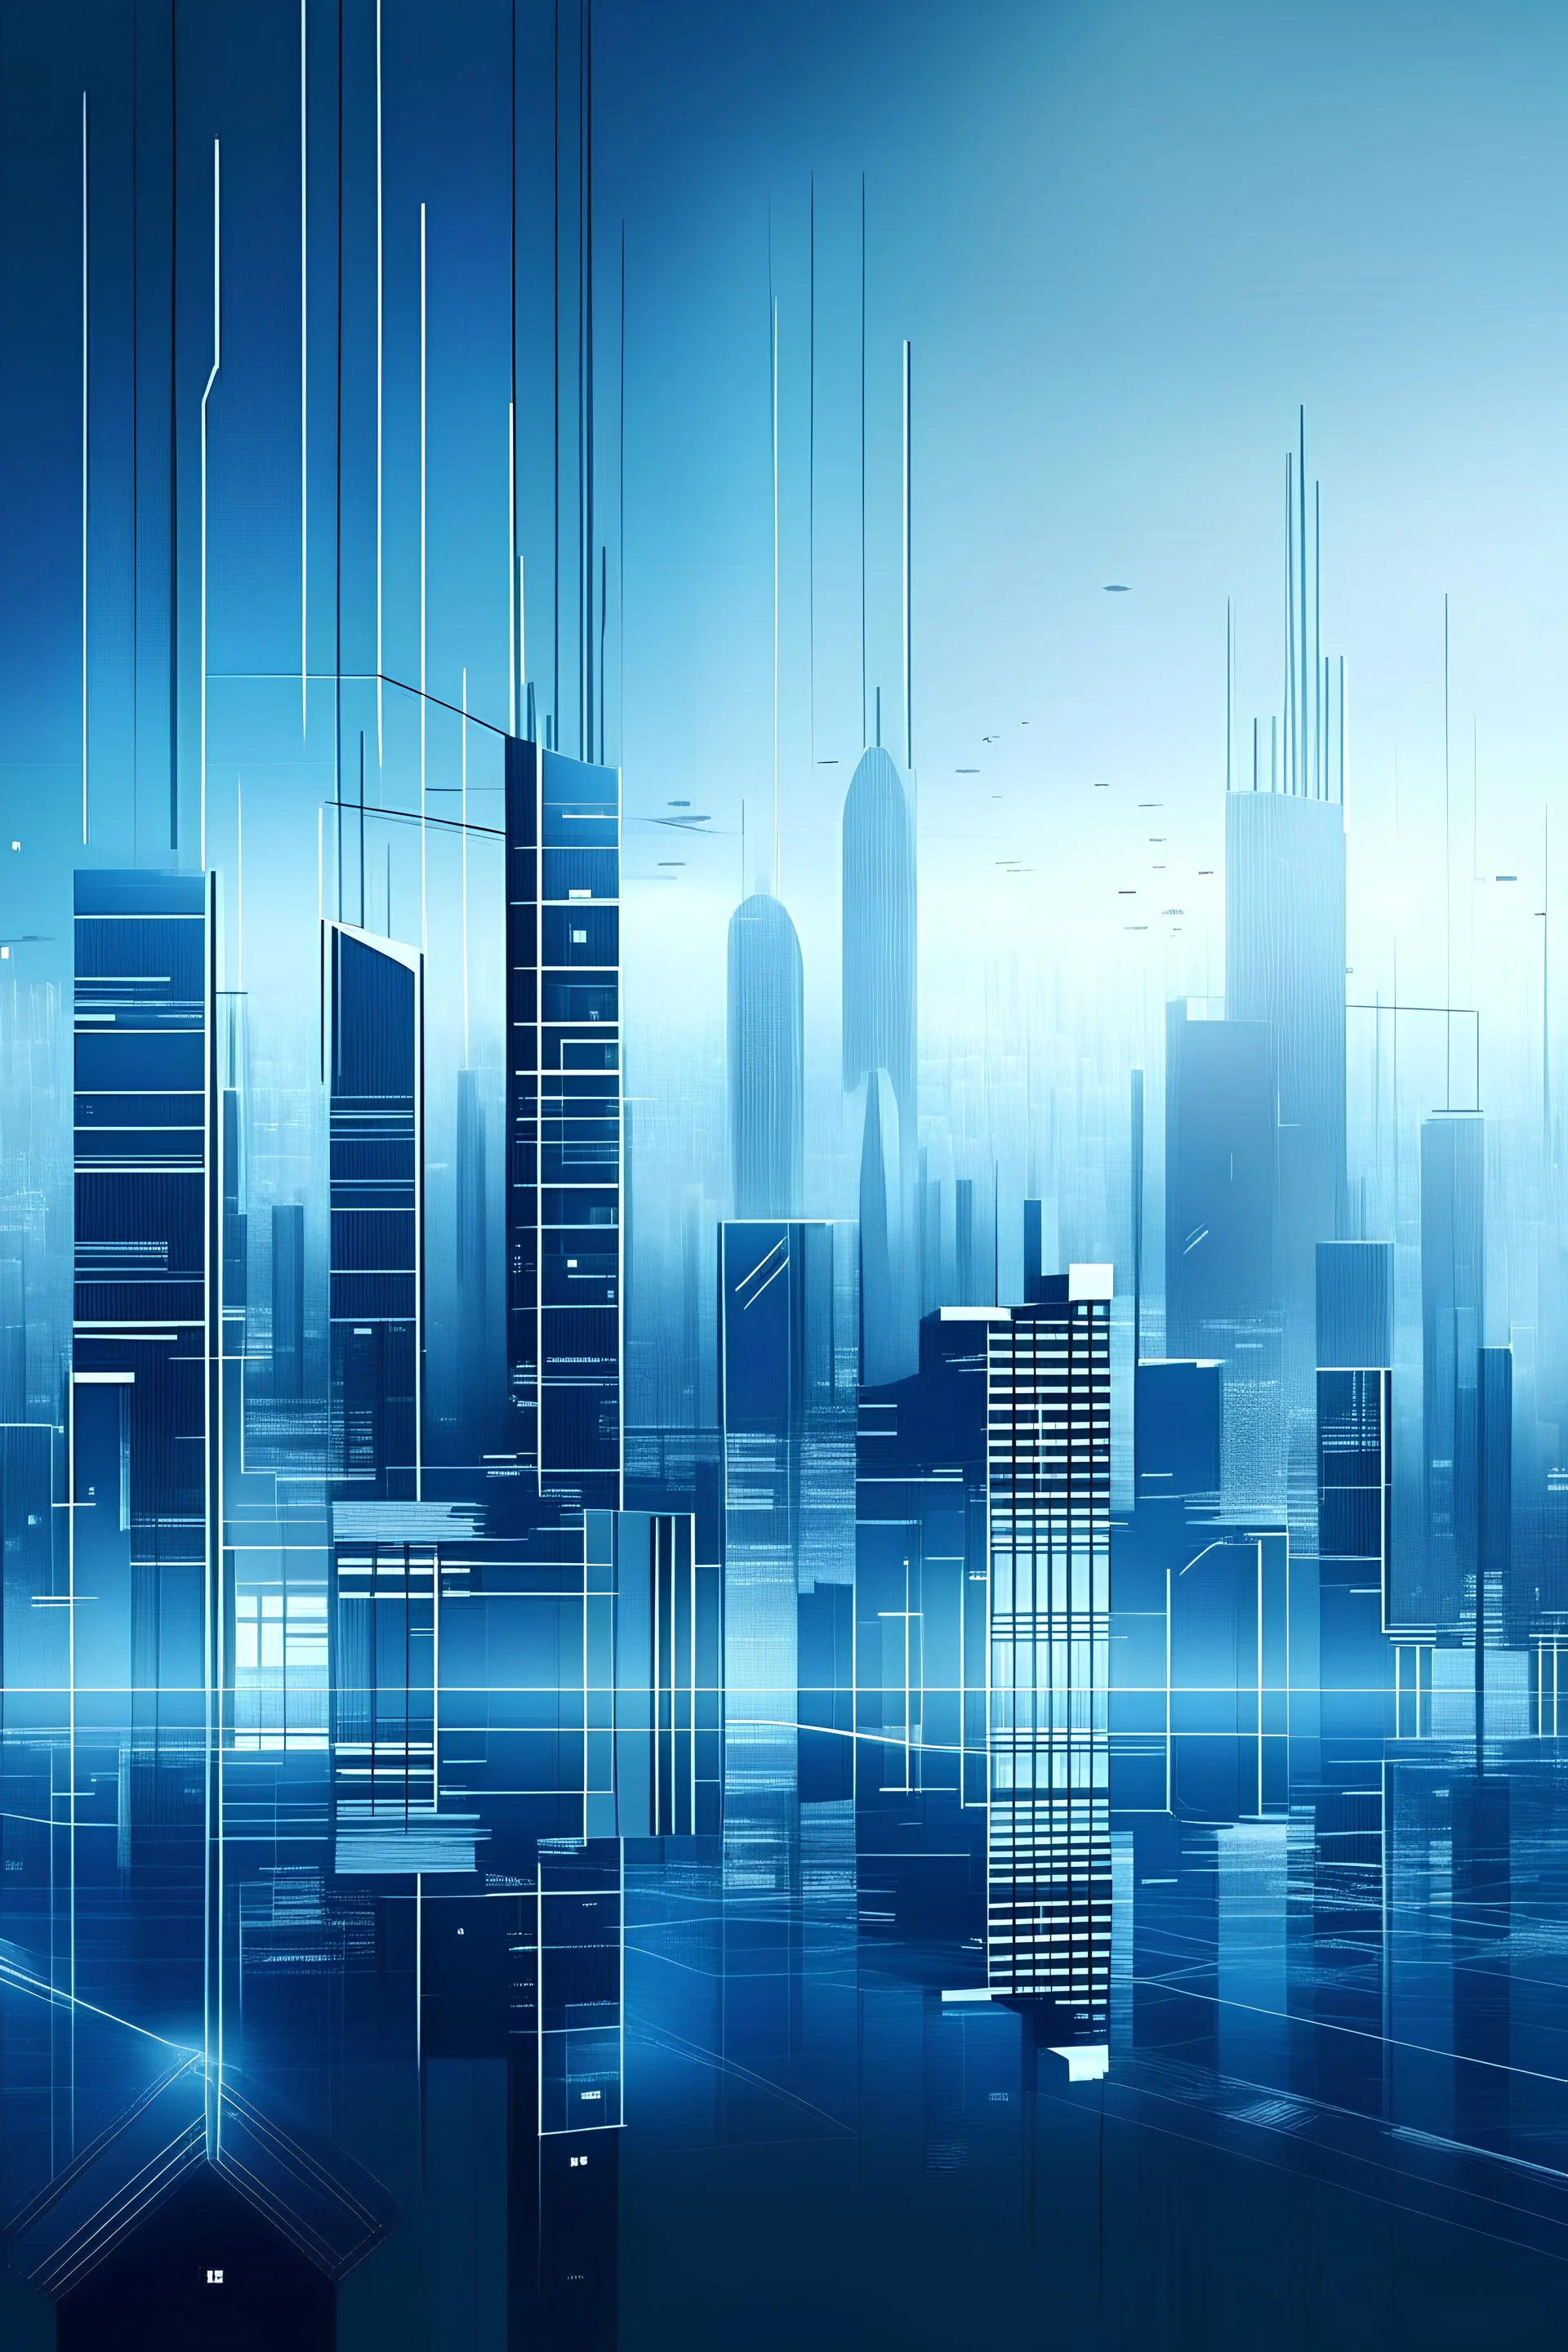 backgrounds with futuristic cityscapes to symbolize innovation and progress featuring teams collaborating in a tech startup environment, emphasizing teamwork and creativity.